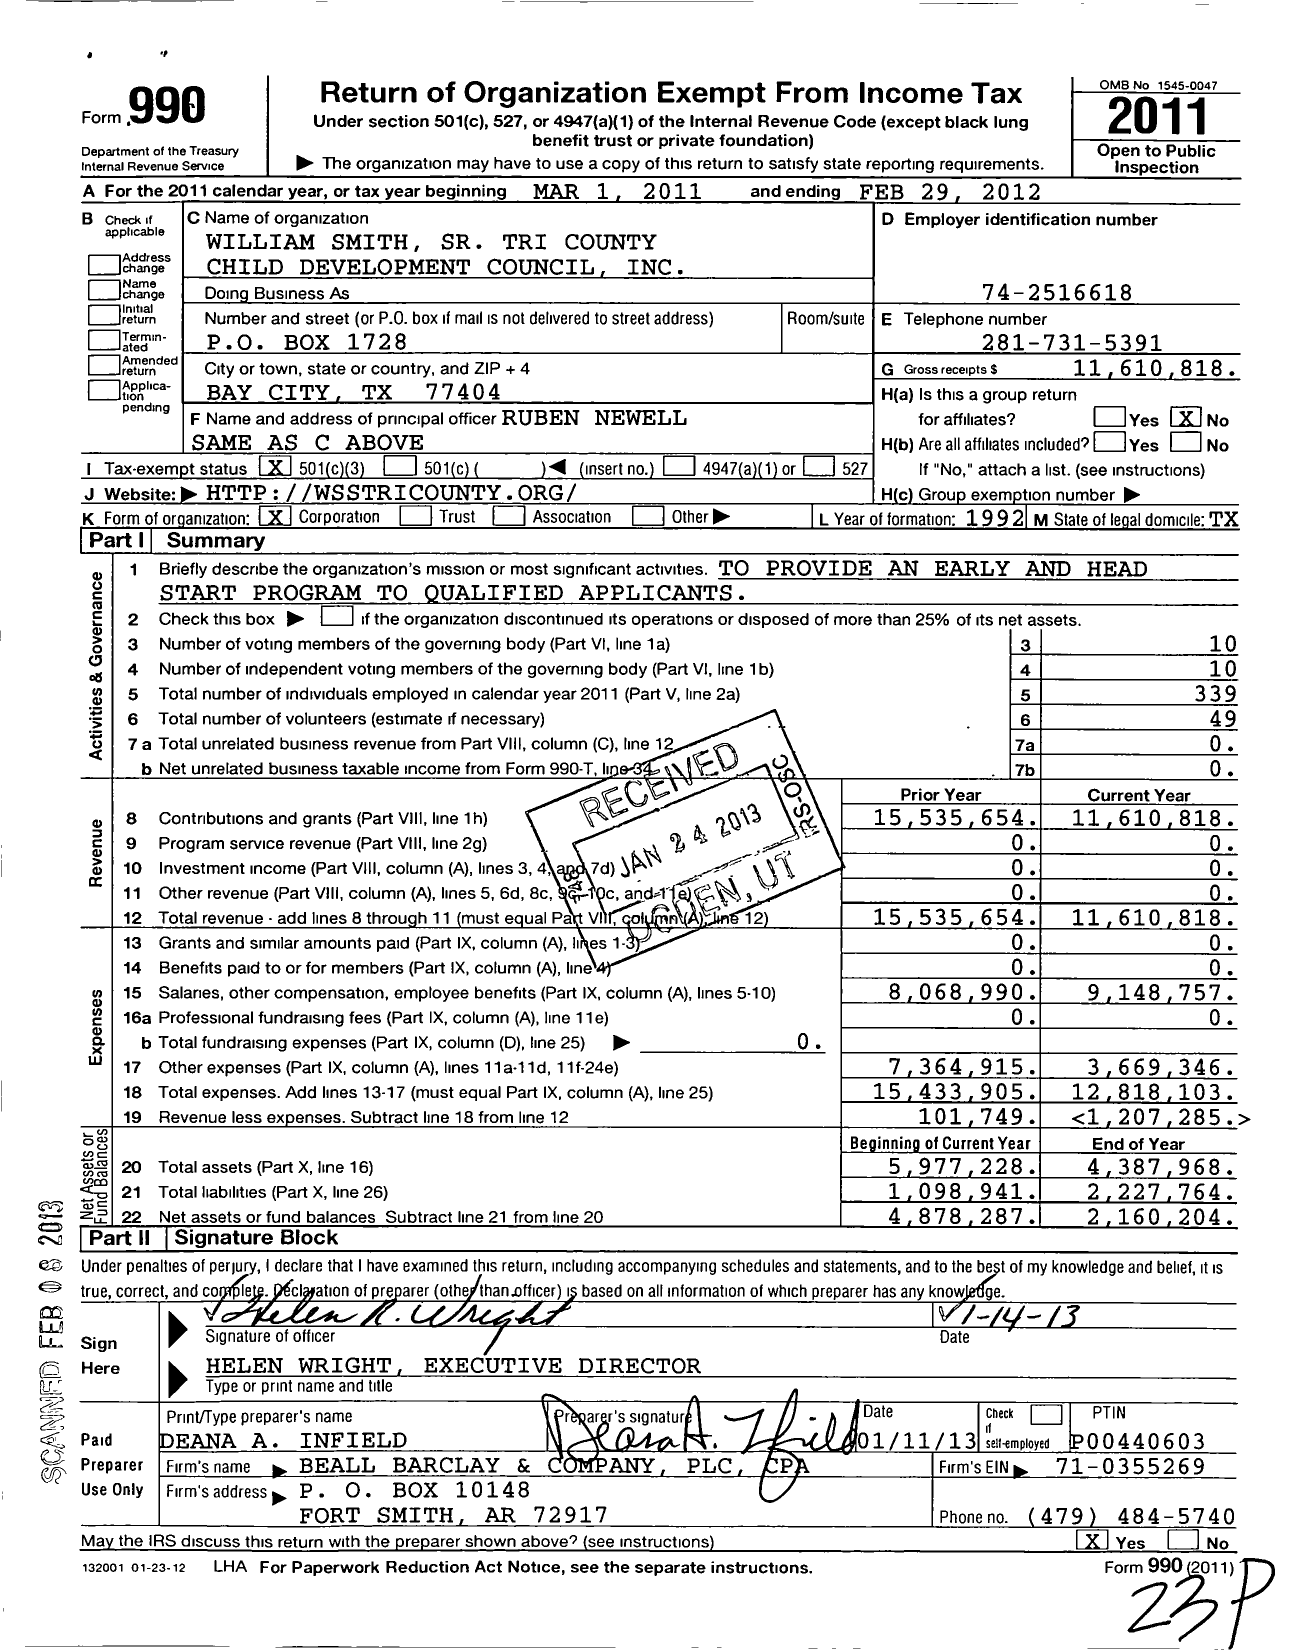 Image of first page of 2011 Form 990 for William Smith Sr Tri County Child Development Council